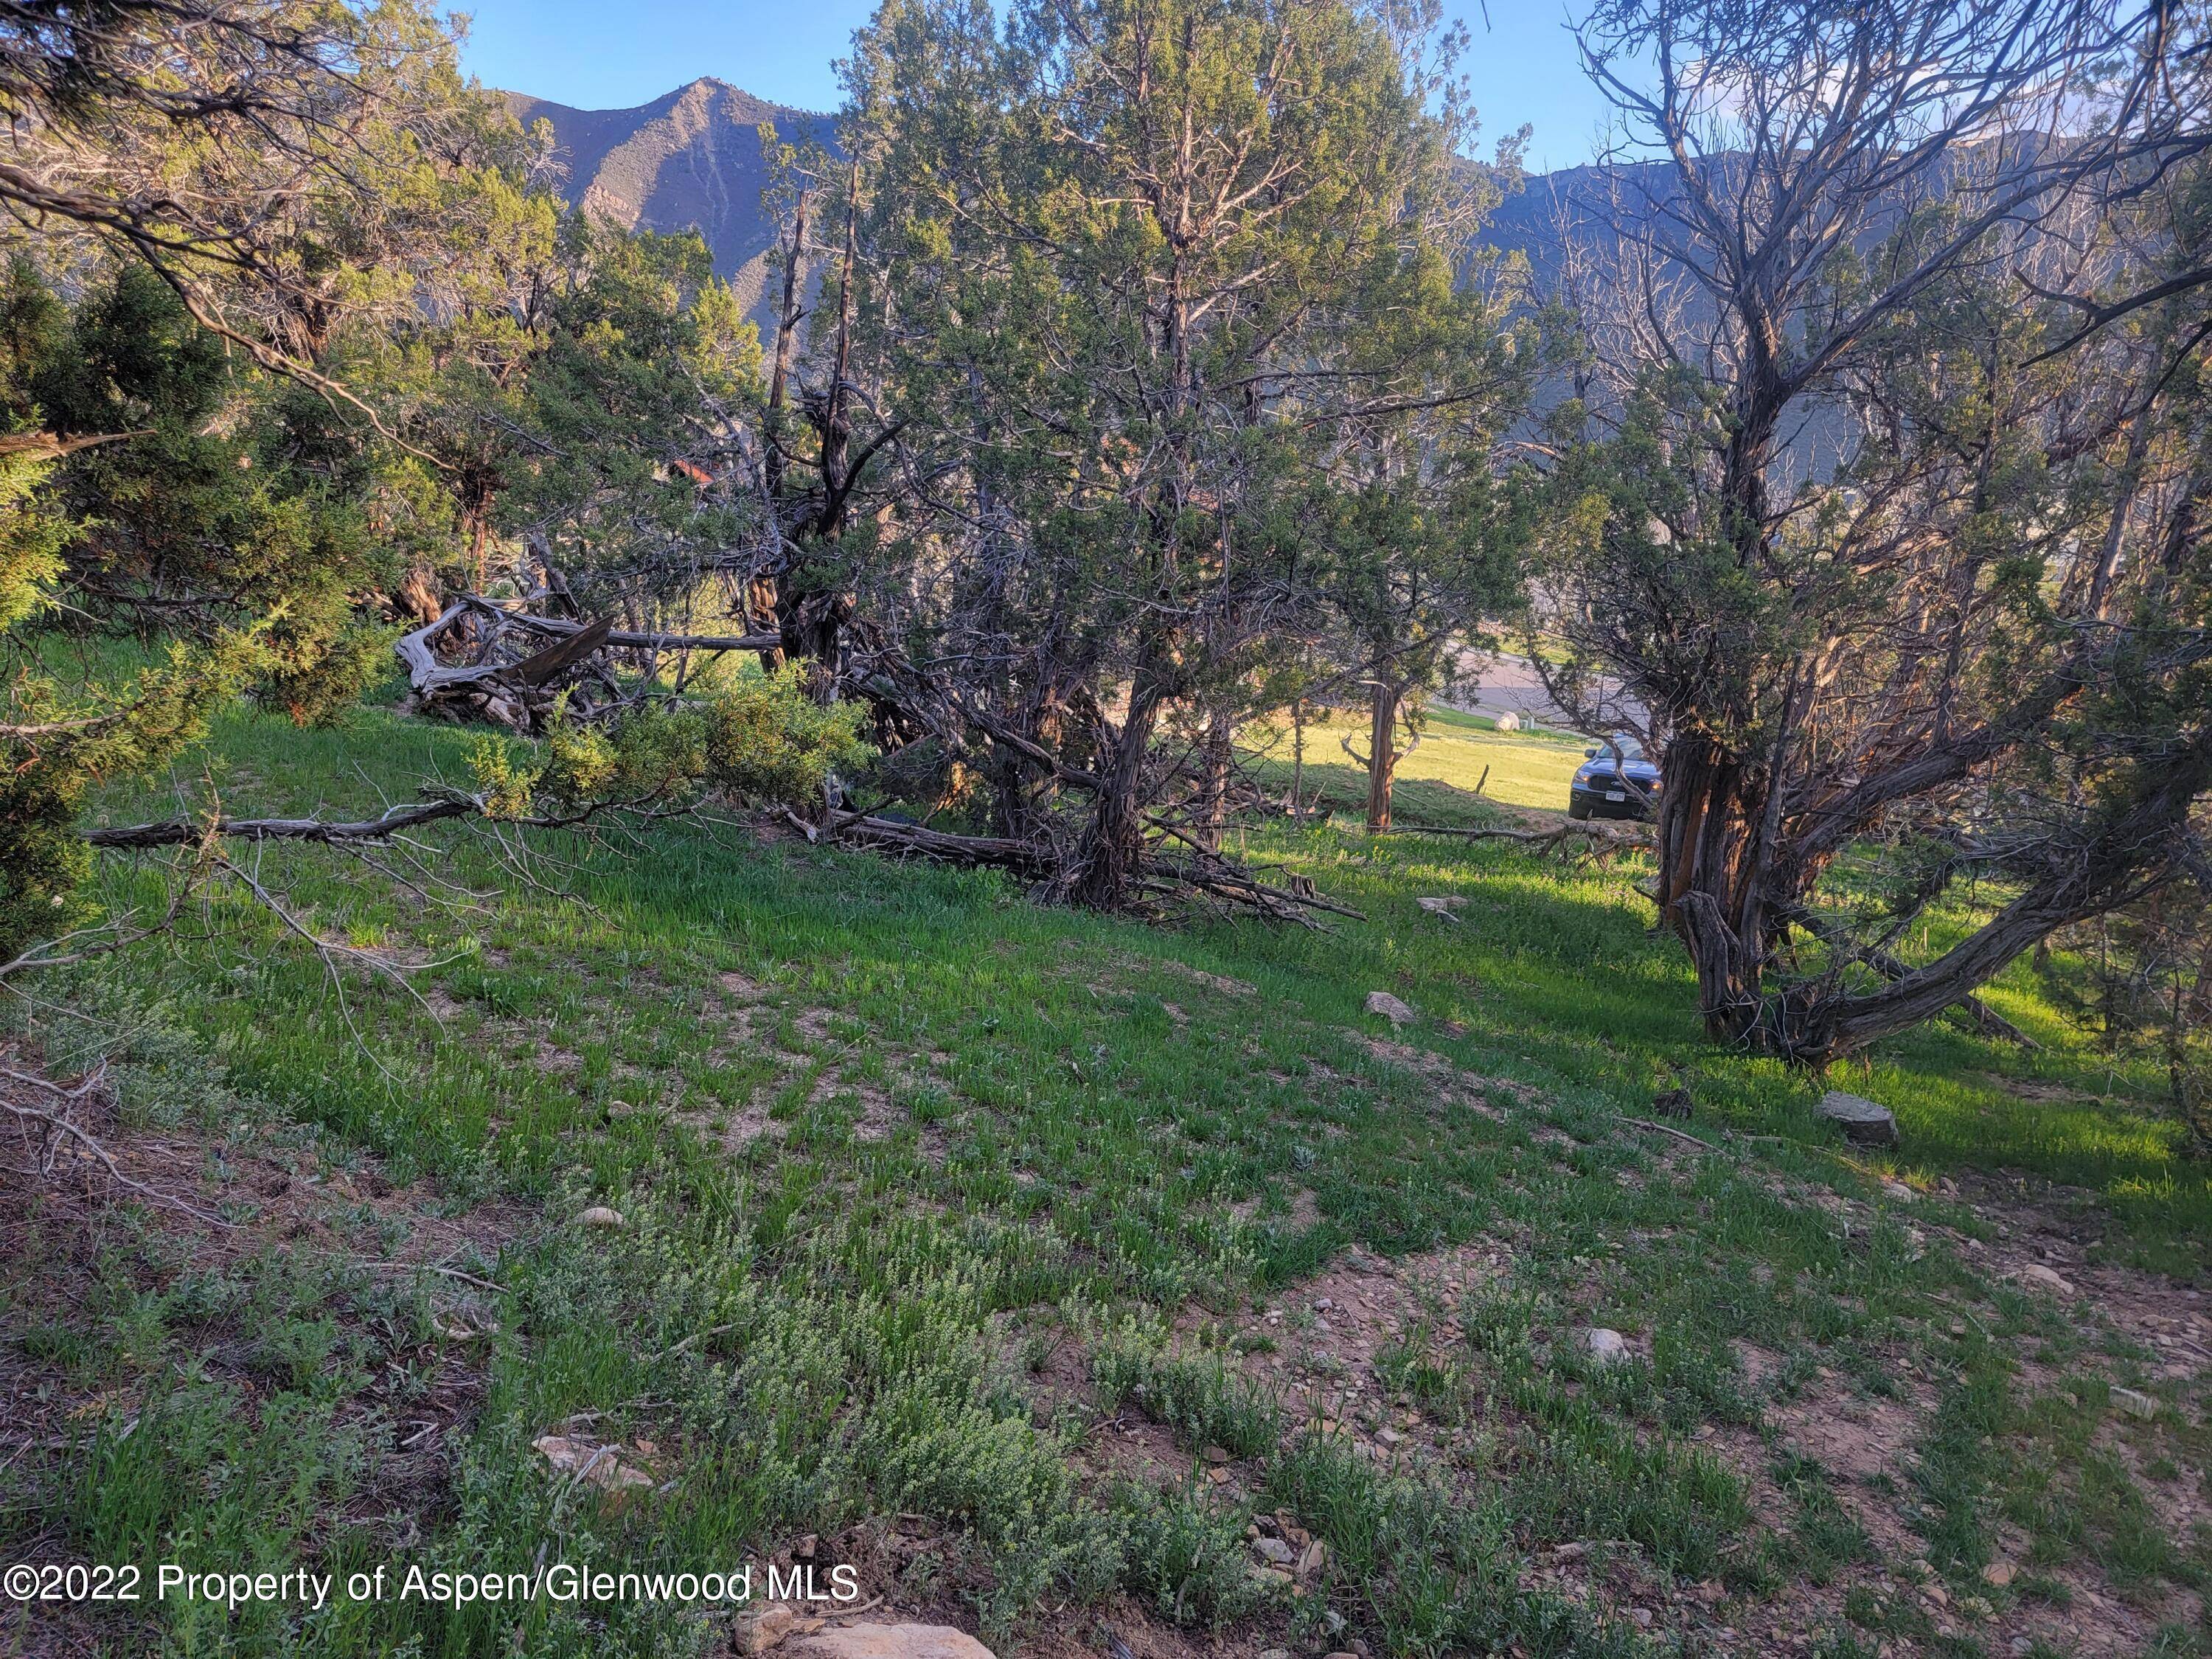 Ideal location as it is very convenient to Glenwood Springs and the rest of the Roaring Fork Valley.